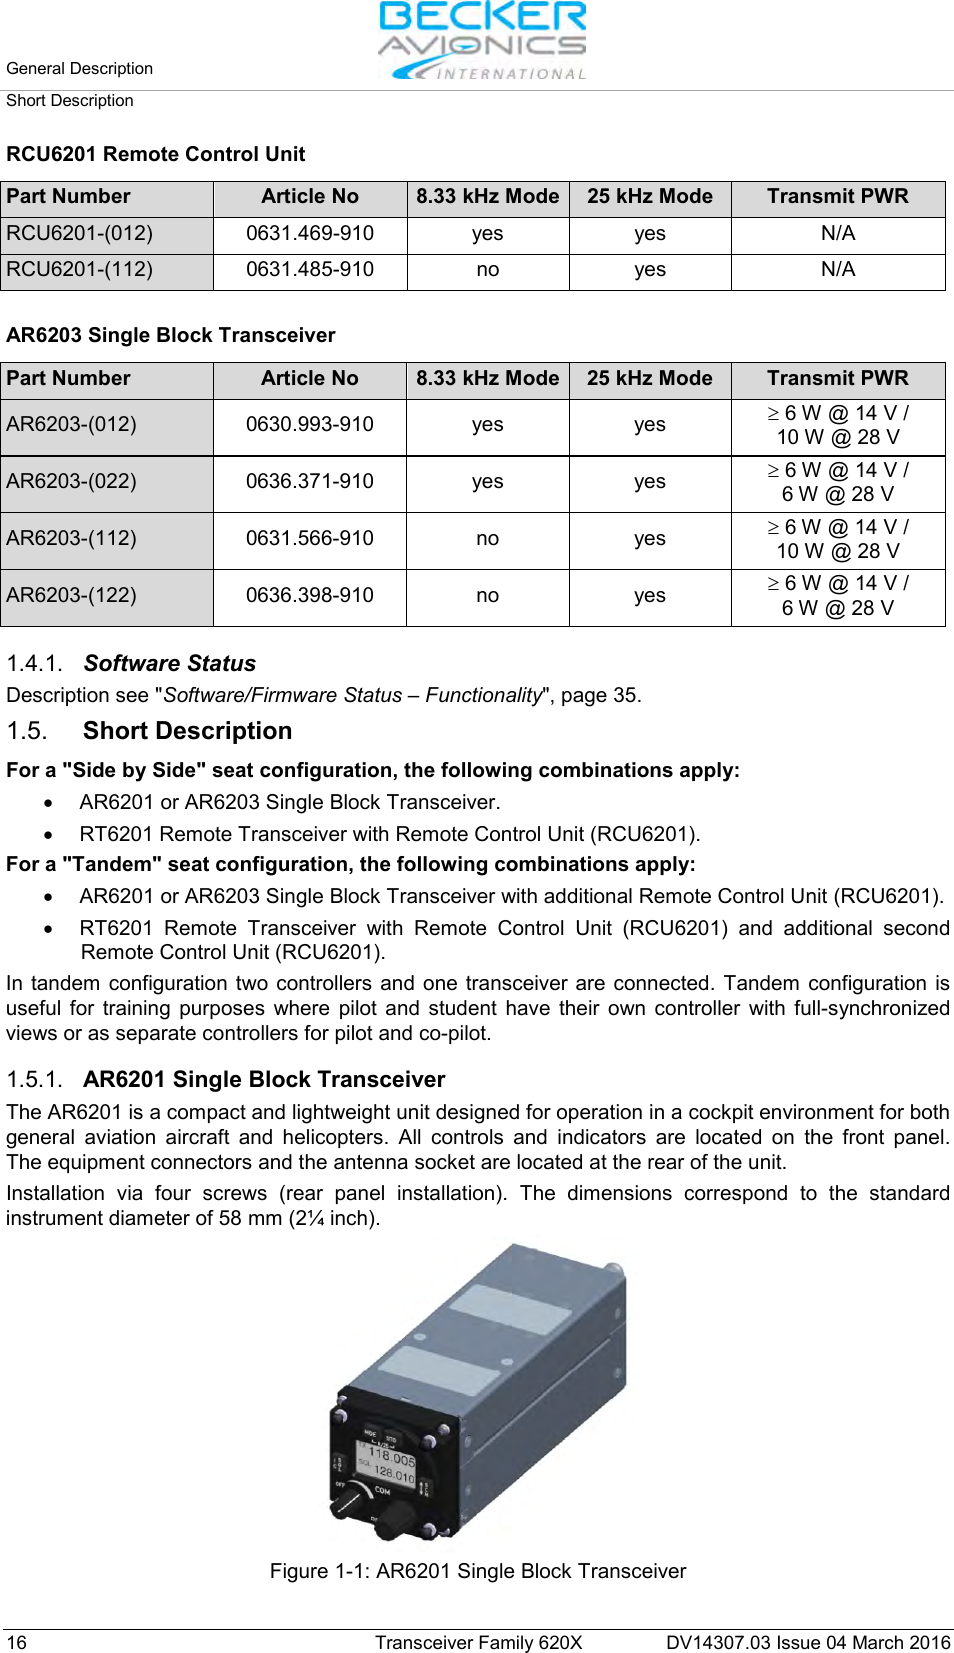 General Description   Short Description  16 Transceiver Family 620X DV14307.03 Issue 04 March 2016 RCU6201 Remote Control Unit  Part Number Article No 8.33 kHz Mode 25 kHz Mode Transmit PWR RCU6201-(012) 0631.469-910 yes yes N/A RCU6201-(112) 0631.485-910 no yes N/A   AR6203 Single Block Transceiver  Part Number Article No 8.33 kHz Mode 25 kHz Mode Transmit PWR AR6203-(012) 0630.993-910 yes yes ≥ 6 W @ 14 V /  10 W @ 28 V AR6203-(022) 0636.371-910 yes yes ≥ 6 W @ 14 V /  6 W @ 28 V AR6203-(112) 0631.566-910 no yes ≥ 6 W @ 14 V /  10 W @ 28 V AR6203-(122) 0636.398-910 no yes ≥ 6 W @ 14 V /  6 W @ 28 V   1.4.1. Software Status Description see &quot;Software/Firmware Status – Functionality&quot;, page 35.  1.5. Short Description For a &quot;Side by Side&quot; seat configuration, the following combinations apply: • AR6201 or AR6203 Single Block Transceiver. • RT6201 Remote Transceiver with Remote Control Unit (RCU6201). For a &quot;Tandem&quot; seat configuration, the following combinations apply: • AR6201 or AR6203 Single Block Transceiver with additional Remote Control Unit (RCU6201). • RT6201 Remote Transceiver with Remote Control Unit  (RCU6201)  and additional second Remote Control Unit (RCU6201). In tandem configuration two controllers and one transceiver are connected. Tandem configuration is useful for training purposes where pilot and student have their own controller with full-synchronized views or as separate controllers for pilot and co-pilot.  1.5.1. AR6201 Single Block Transceiver The AR6201 is a compact and lightweight unit designed for operation in a cockpit environment for both general aviation aircraft and helicopters. All controls and indicators are located on the front panel.  The equipment connectors and the antenna socket are located at the rear of the unit.  Installation via four screws (rear panel installation). The dimensions correspond to the standard instrument diameter of 58 mm (2¼ inch).  Figure 1-1: AR6201 Single Block Transceiver  